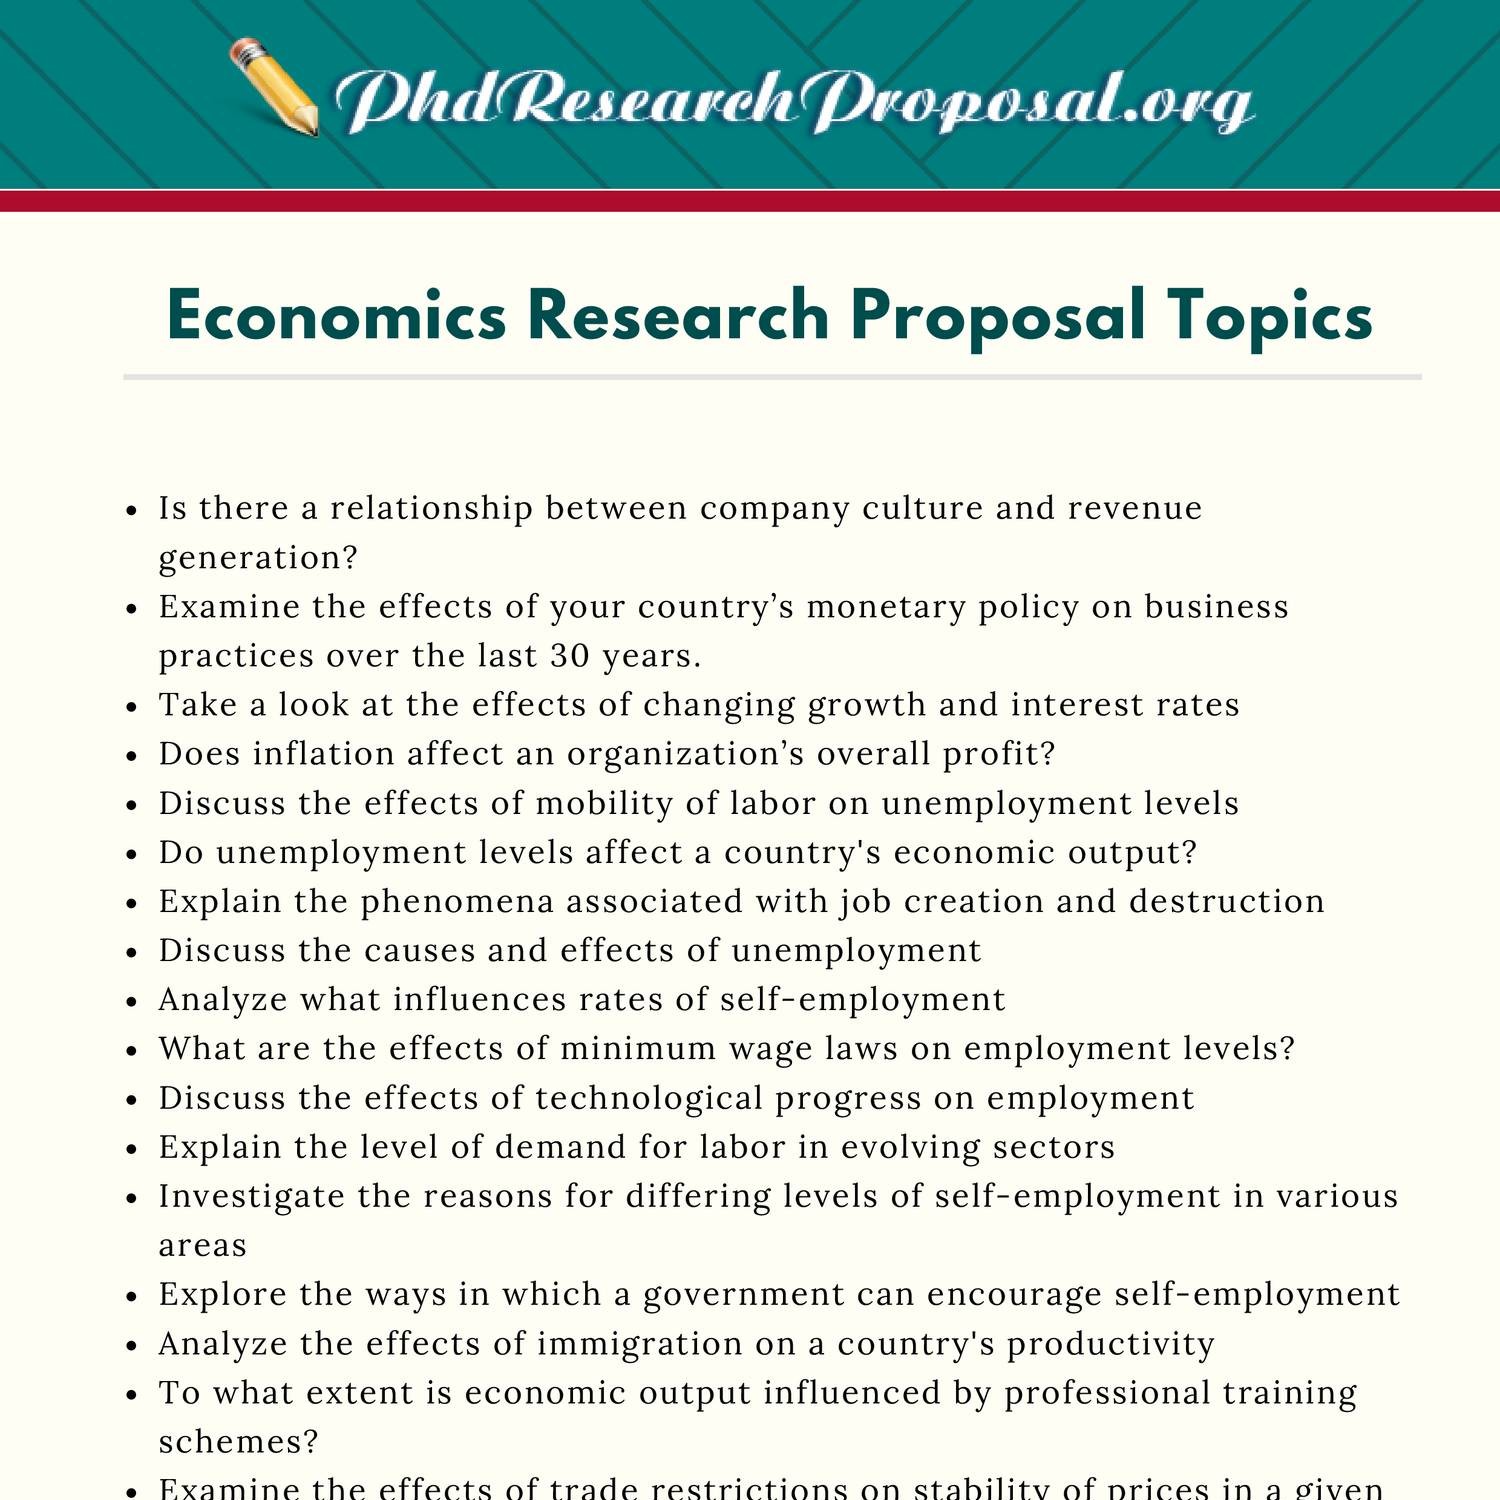 action research topics for b.ed students in economics